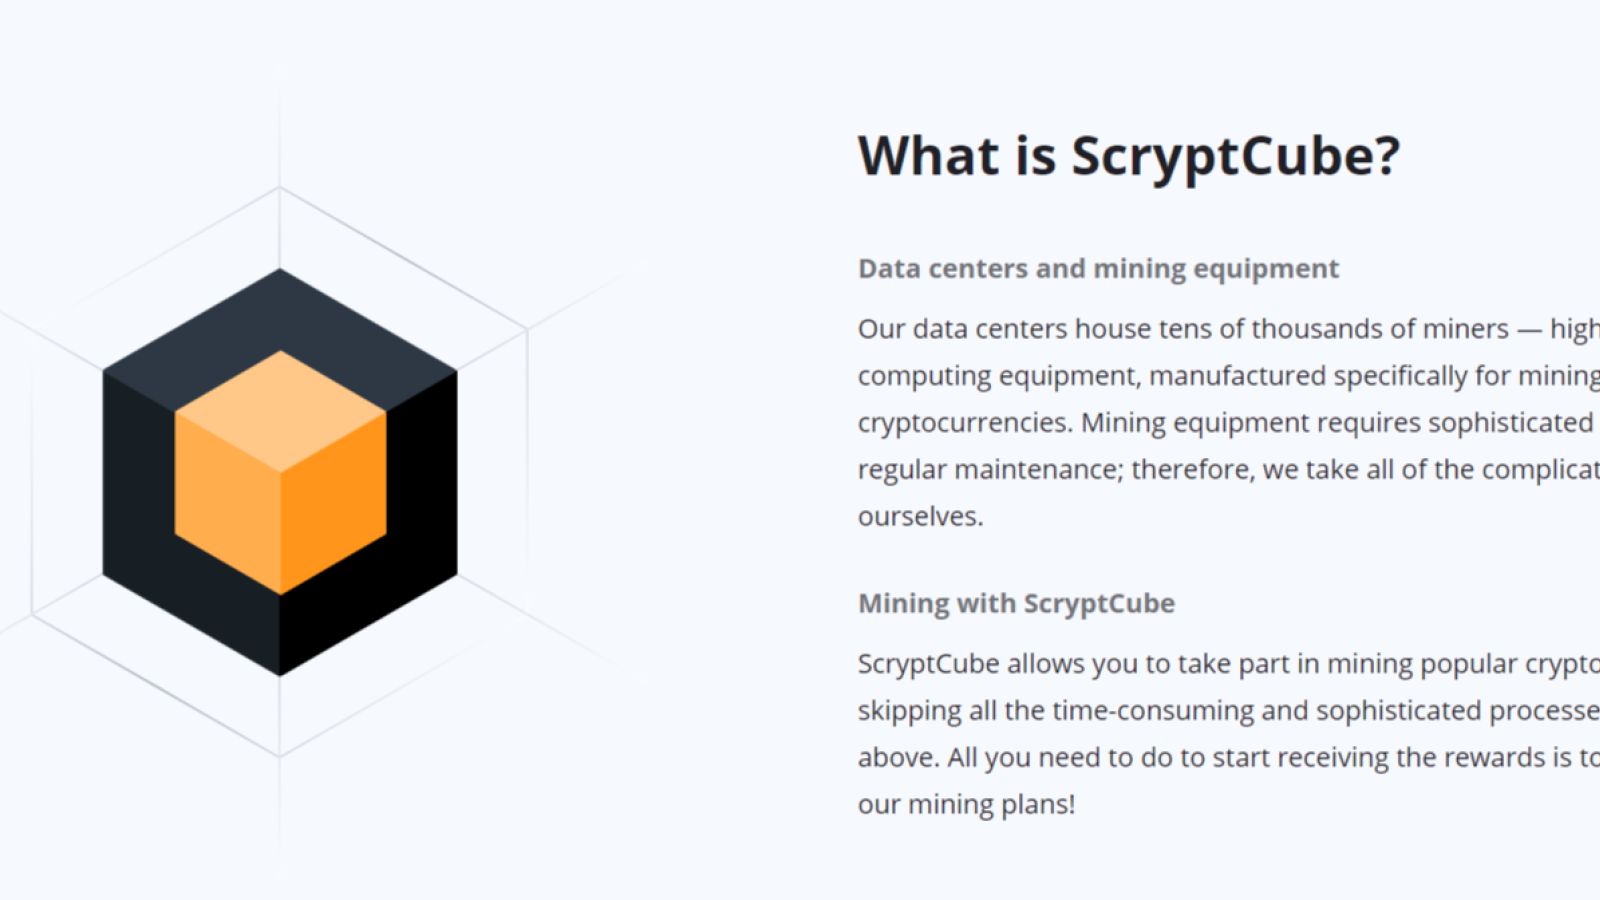 ScryptCube cloud mining service launched in 2016